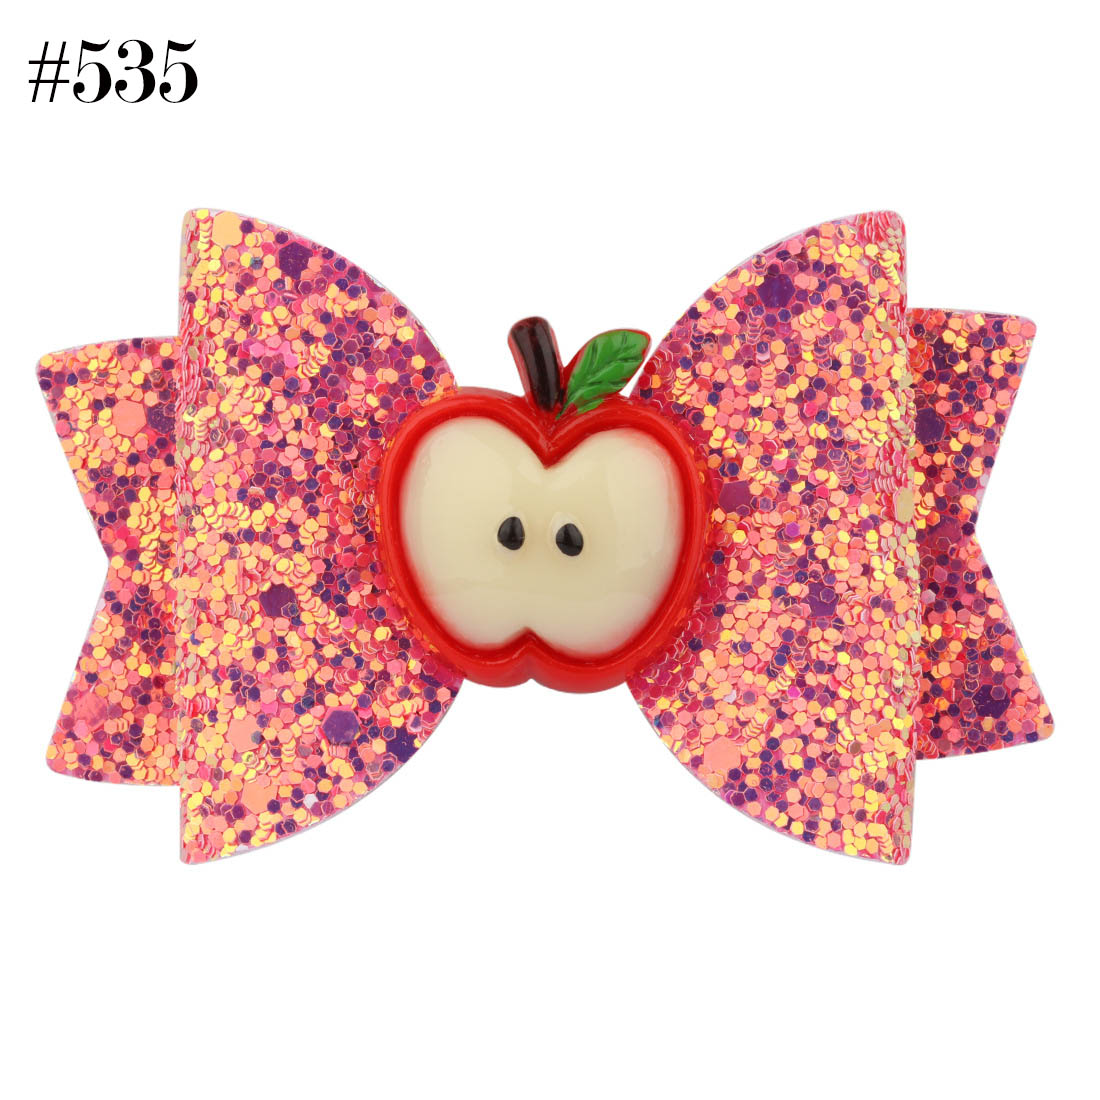 gradient bowknot with fruit hair bows